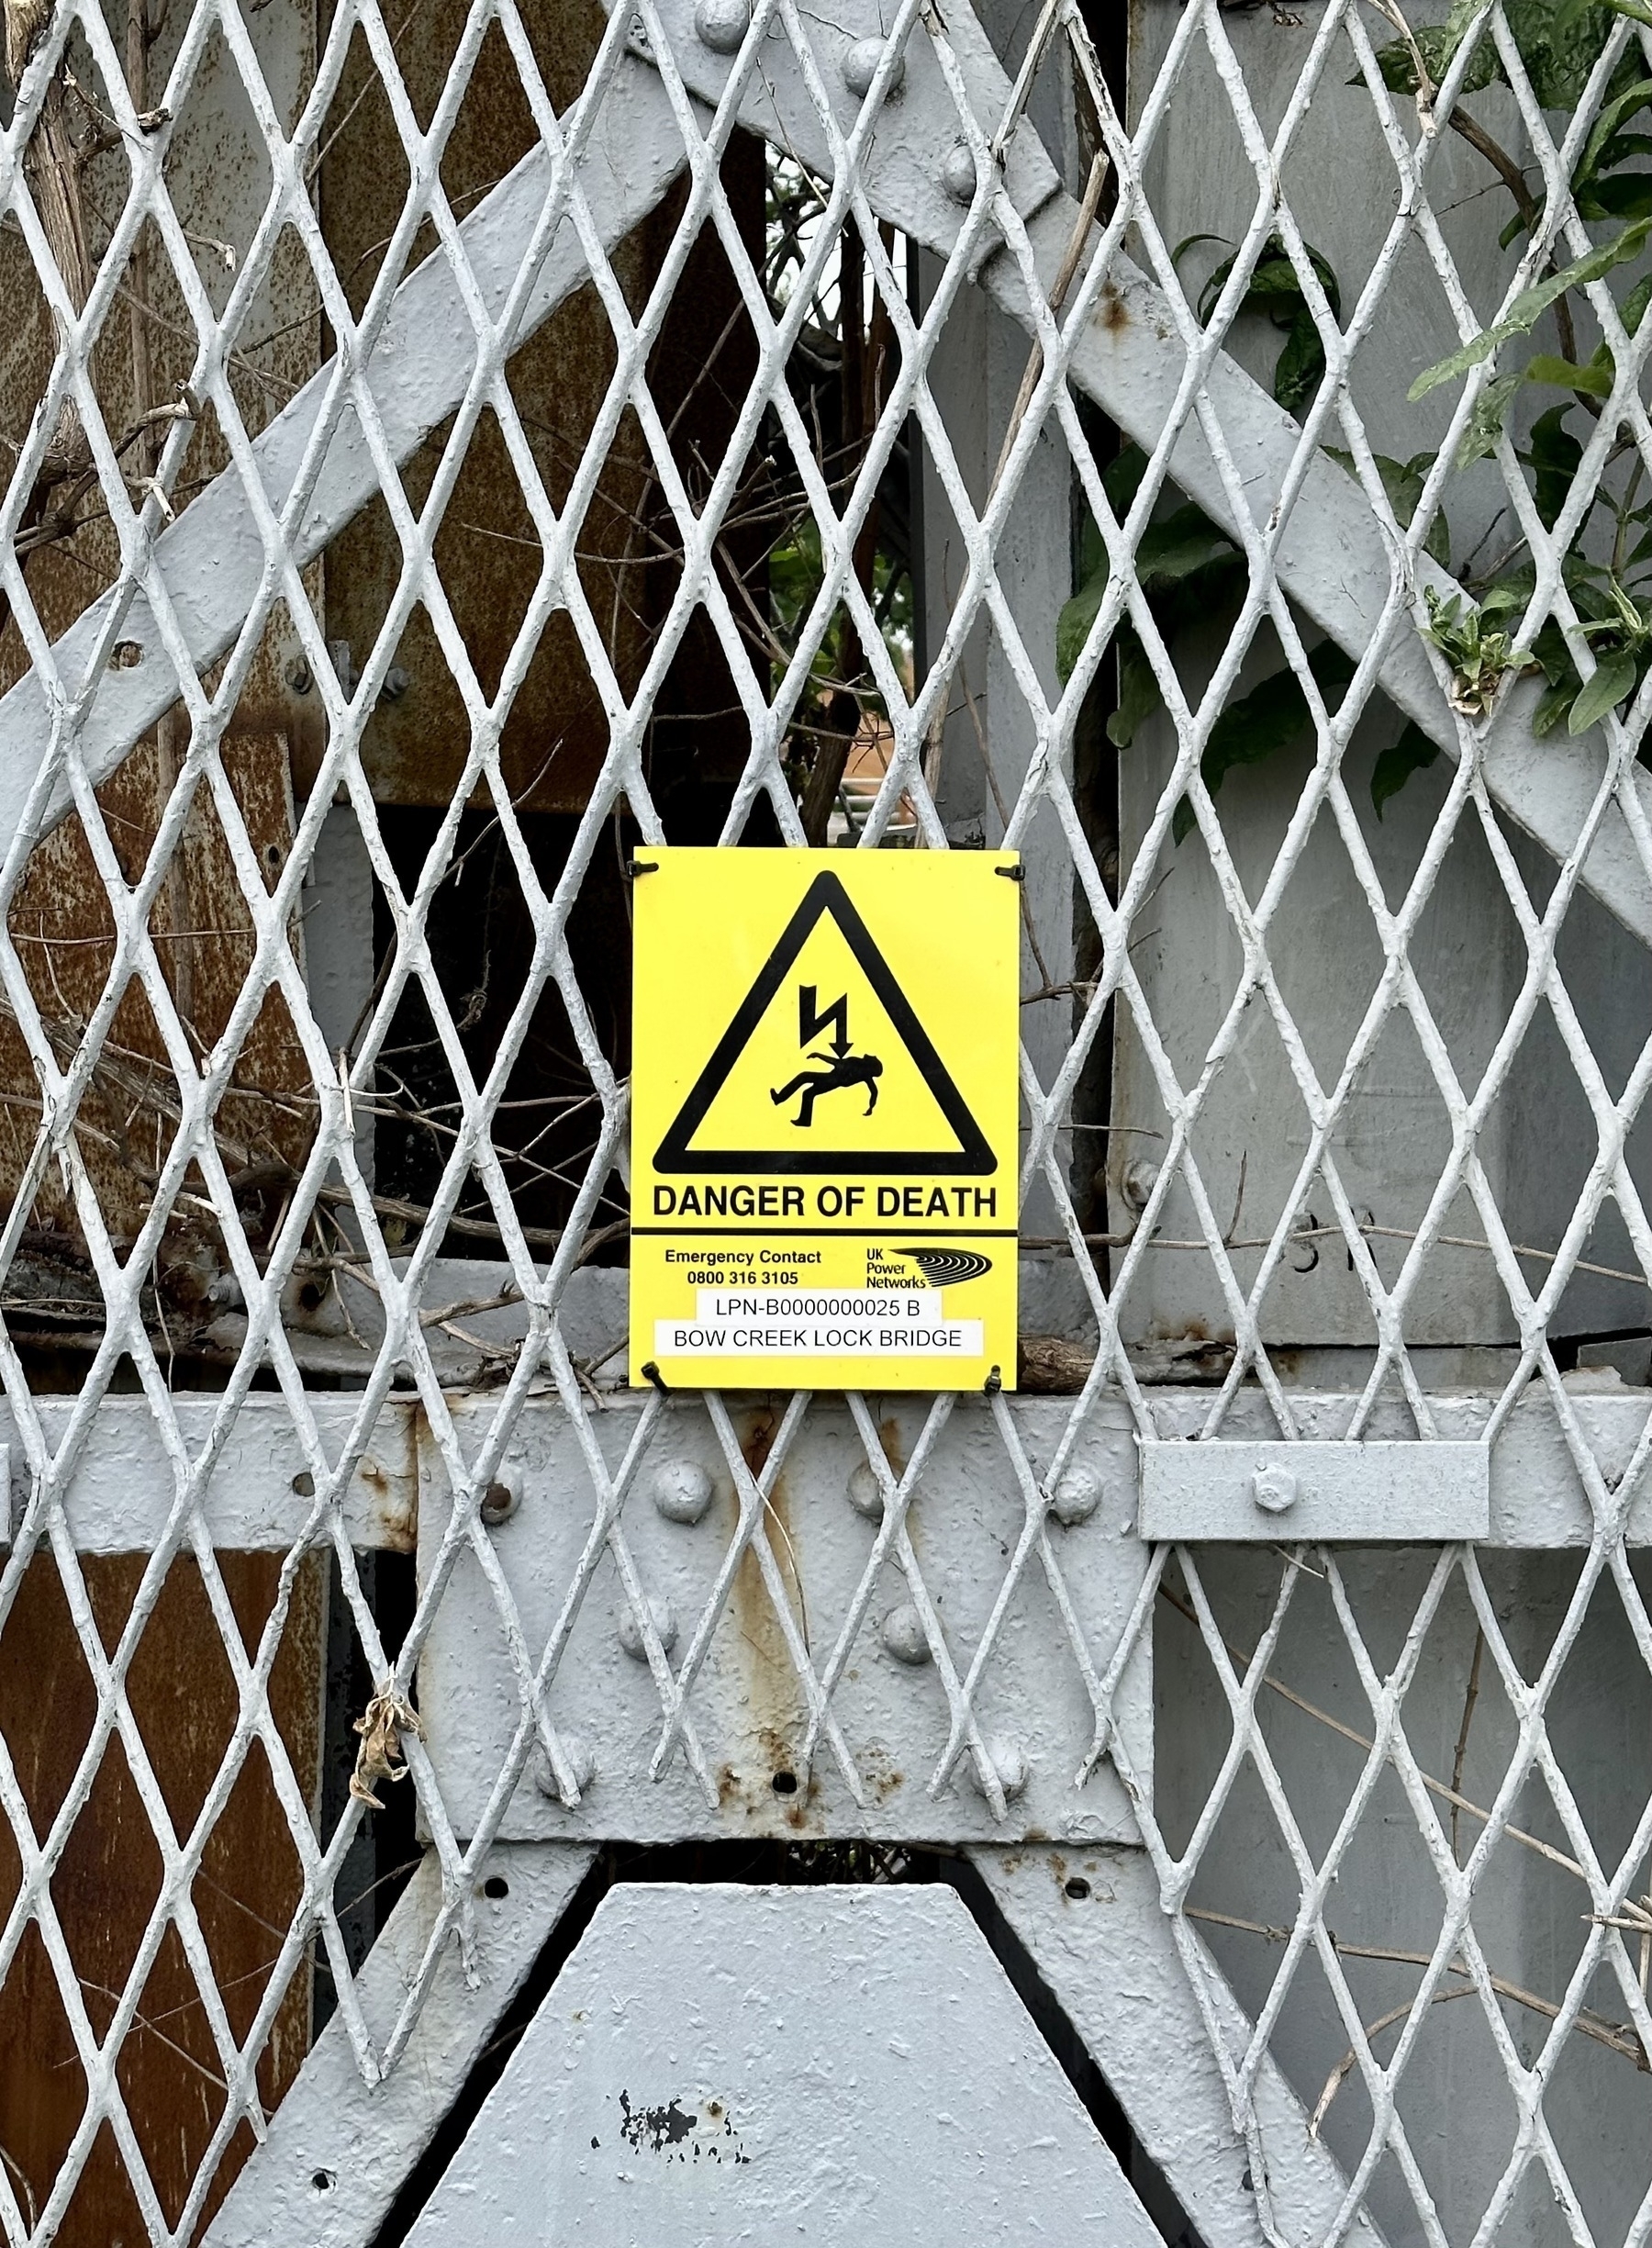 A yellow sign that says danger of death on a grey metal grating.